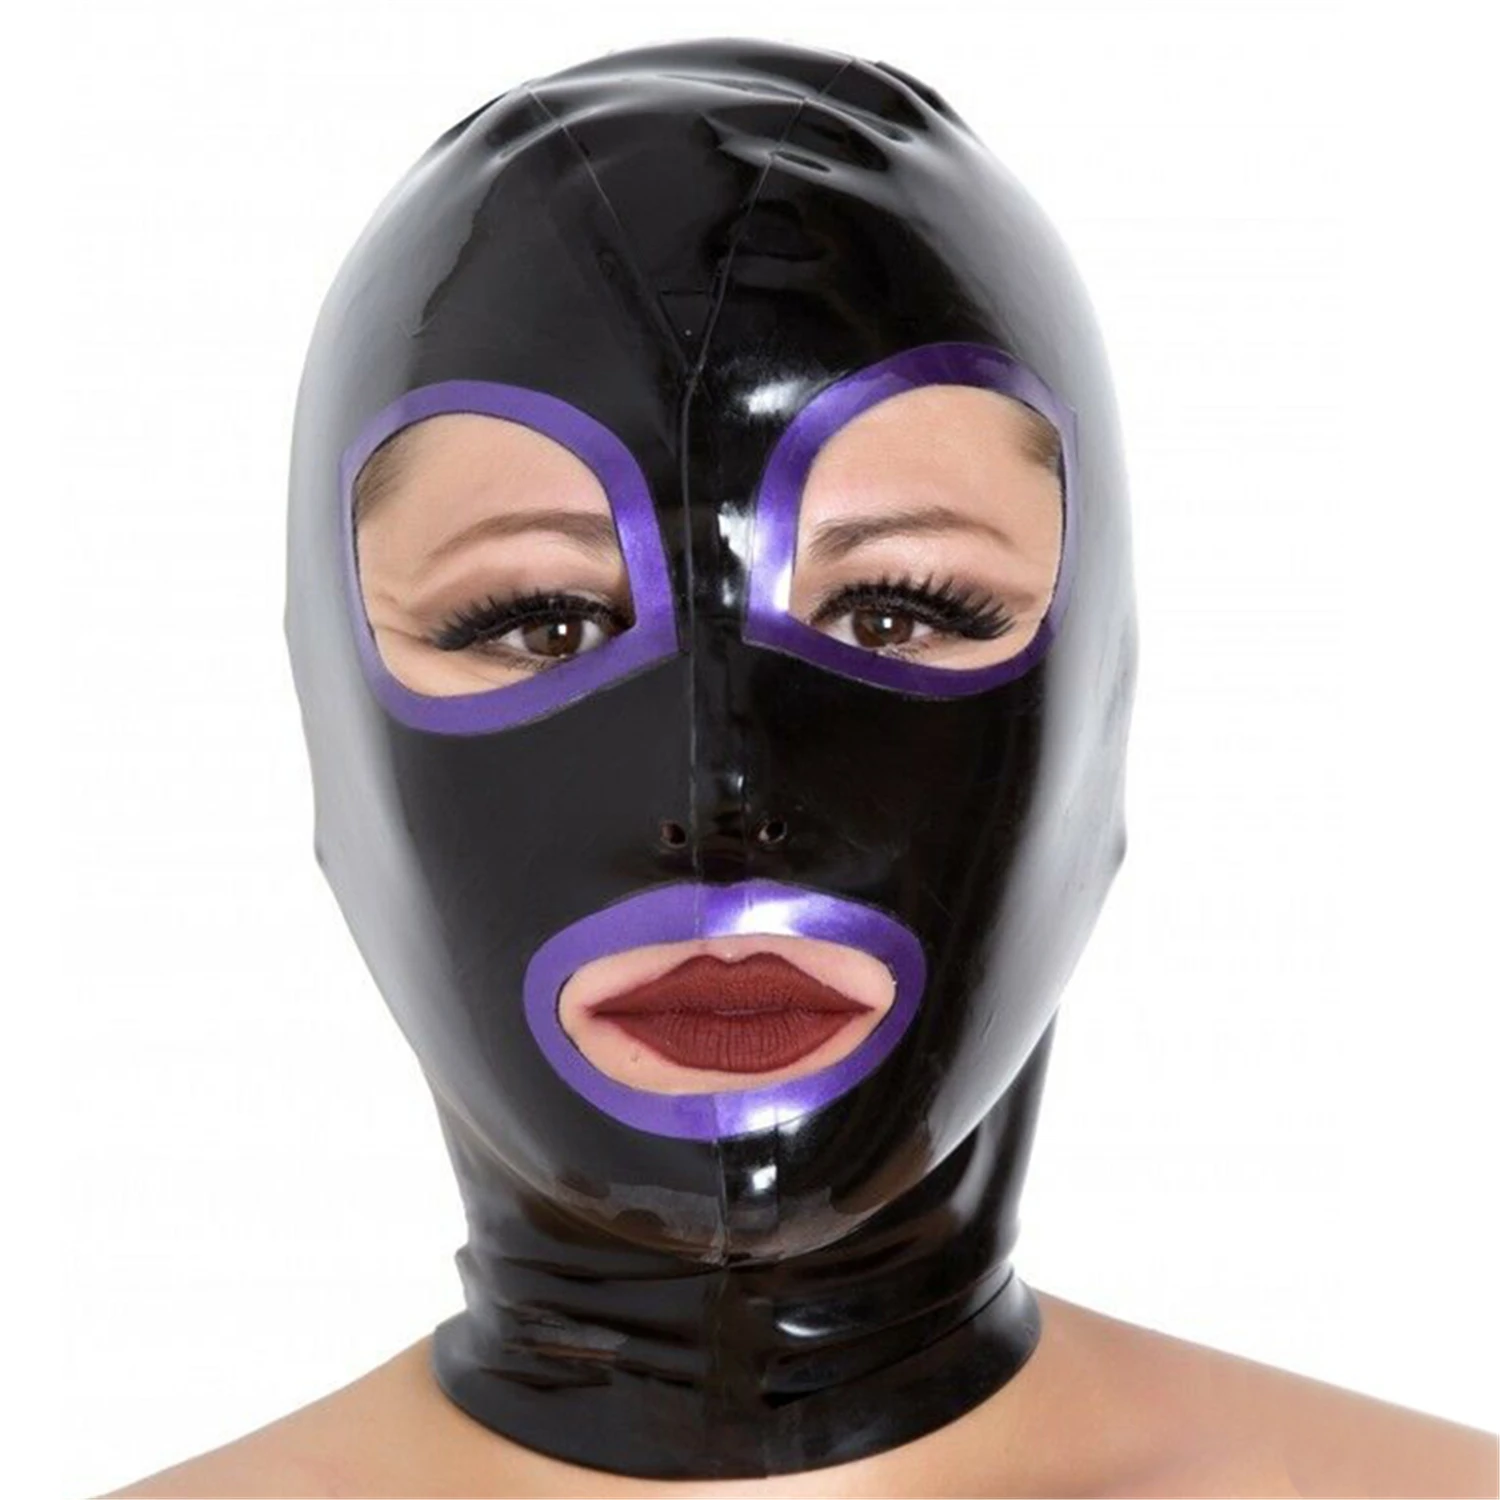 sexy exotic lingerie lenceria handmade cekc black latex with purple trim  open eyes mouth hoods hood back zipper costumes fetish